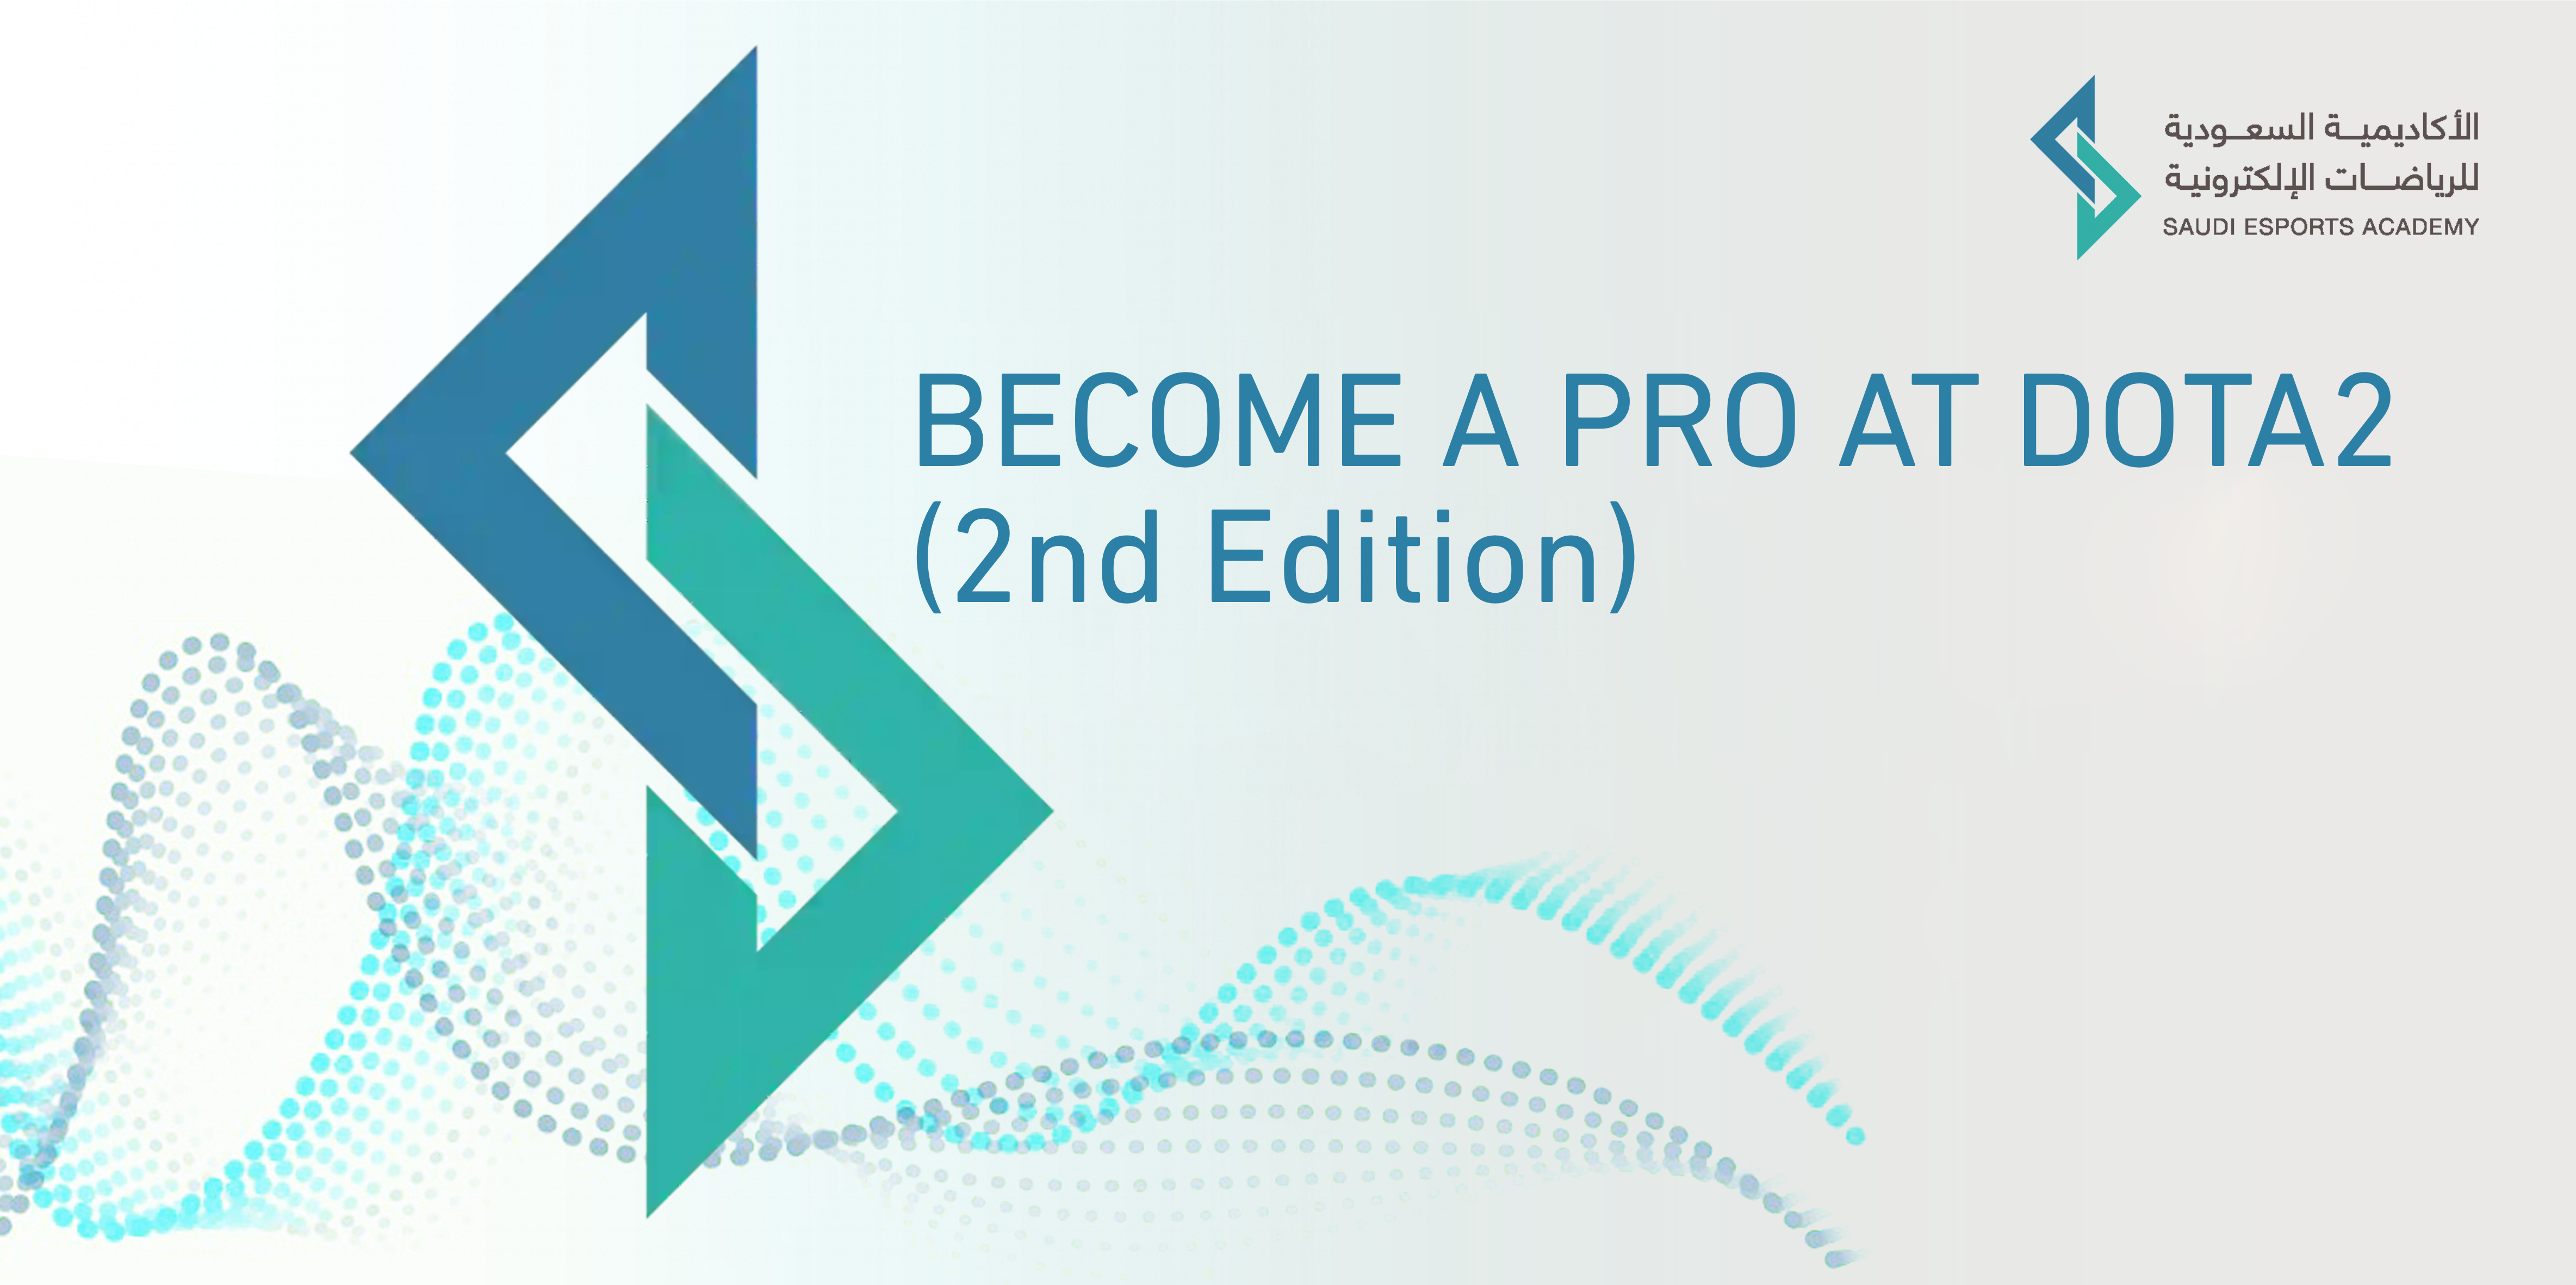 BECOME A PRO AT DOTA2 (2nd Edition) DT2